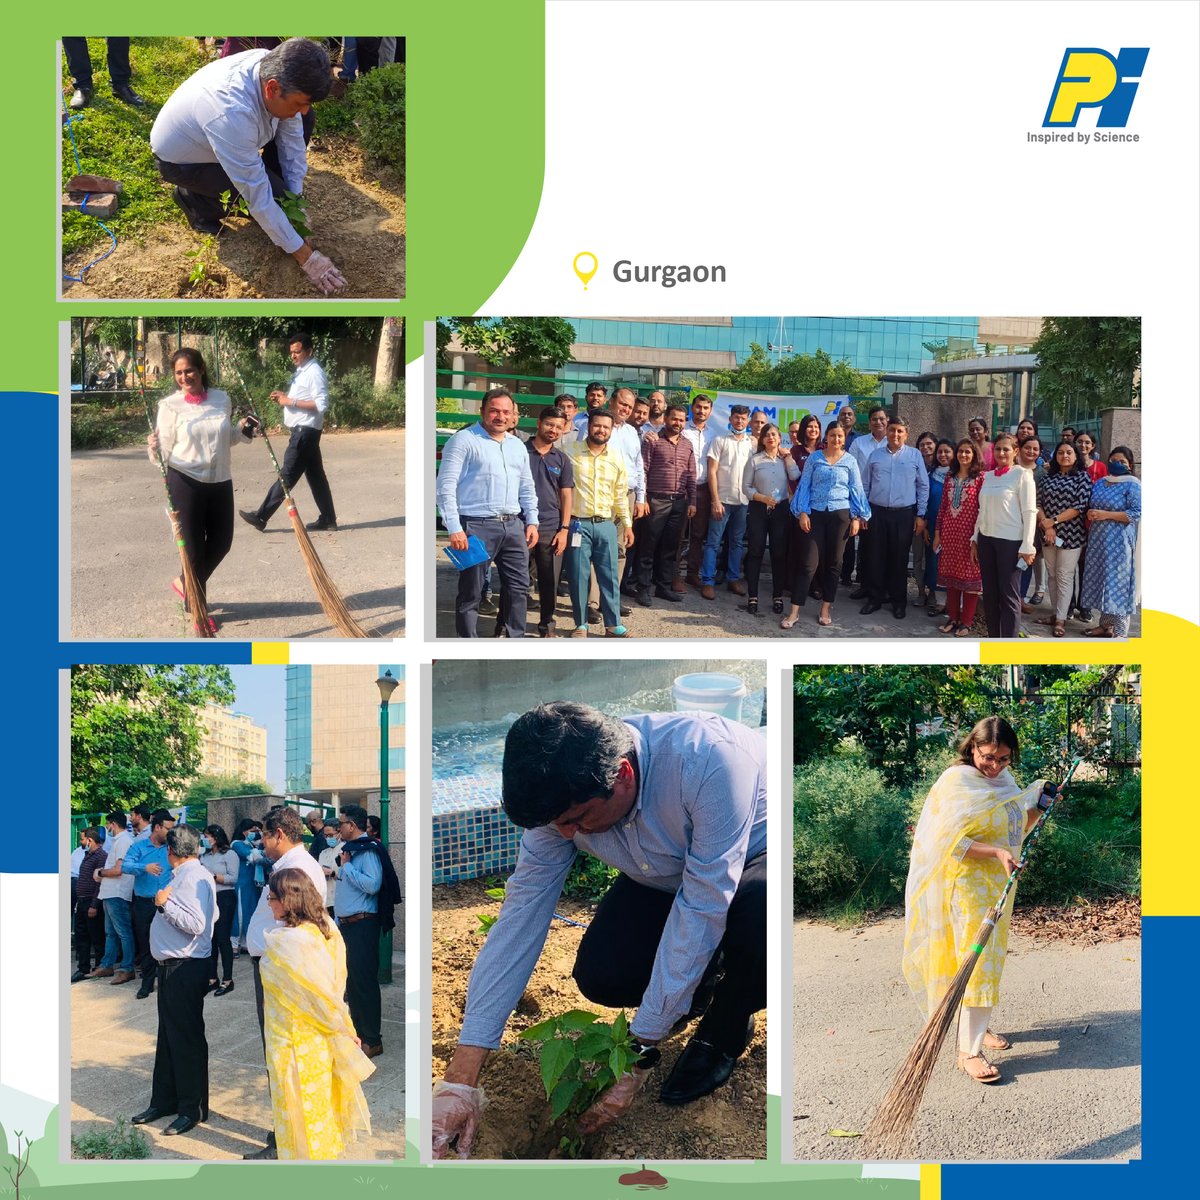 On #WorldEnvironmentDay, the #PI team came together to organize various initiatives like a #TreePlantation Drive and #CommunityCleaning, aimed at promoting a greener and healthier #environment in our surroundings.

#PI #piindustriesltd #inspiredbyscience  #beatplasticpollution